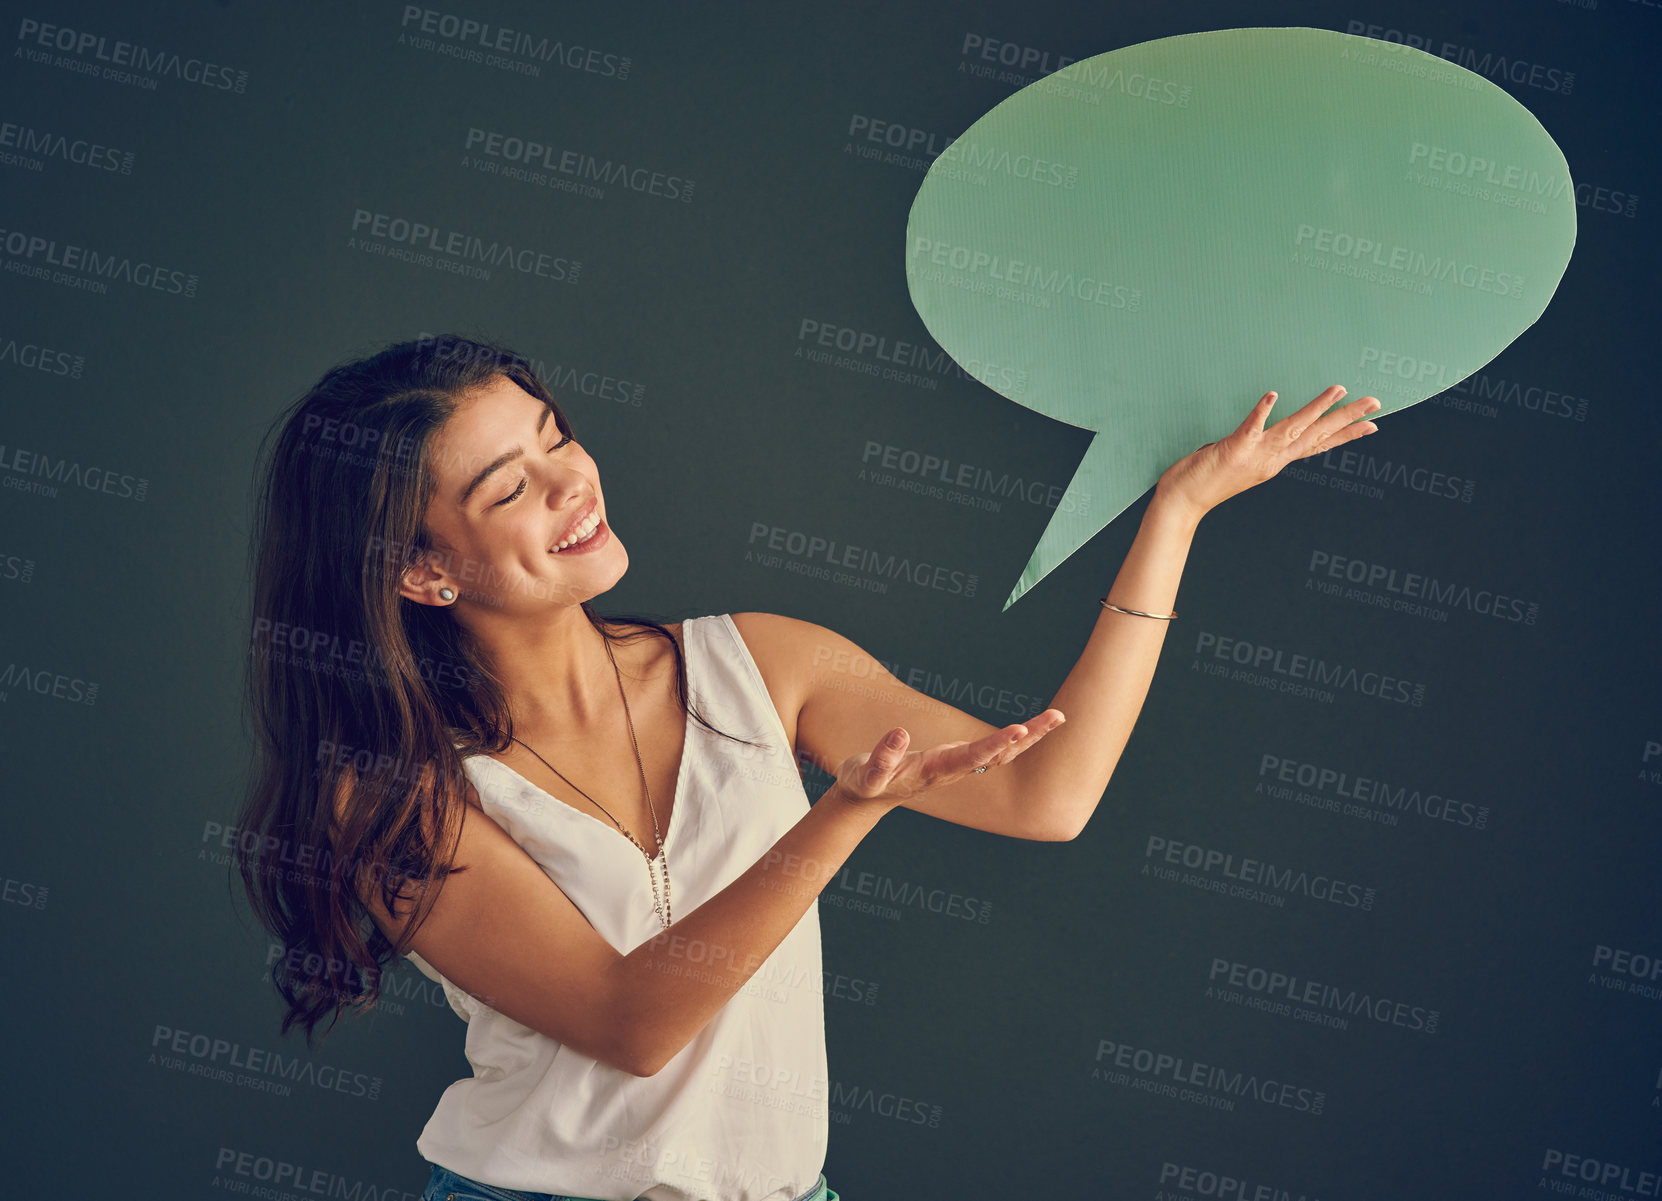 Buy stock photo Studio shot of a cheerful young woman holding up a speech bubble while standing against a dark background